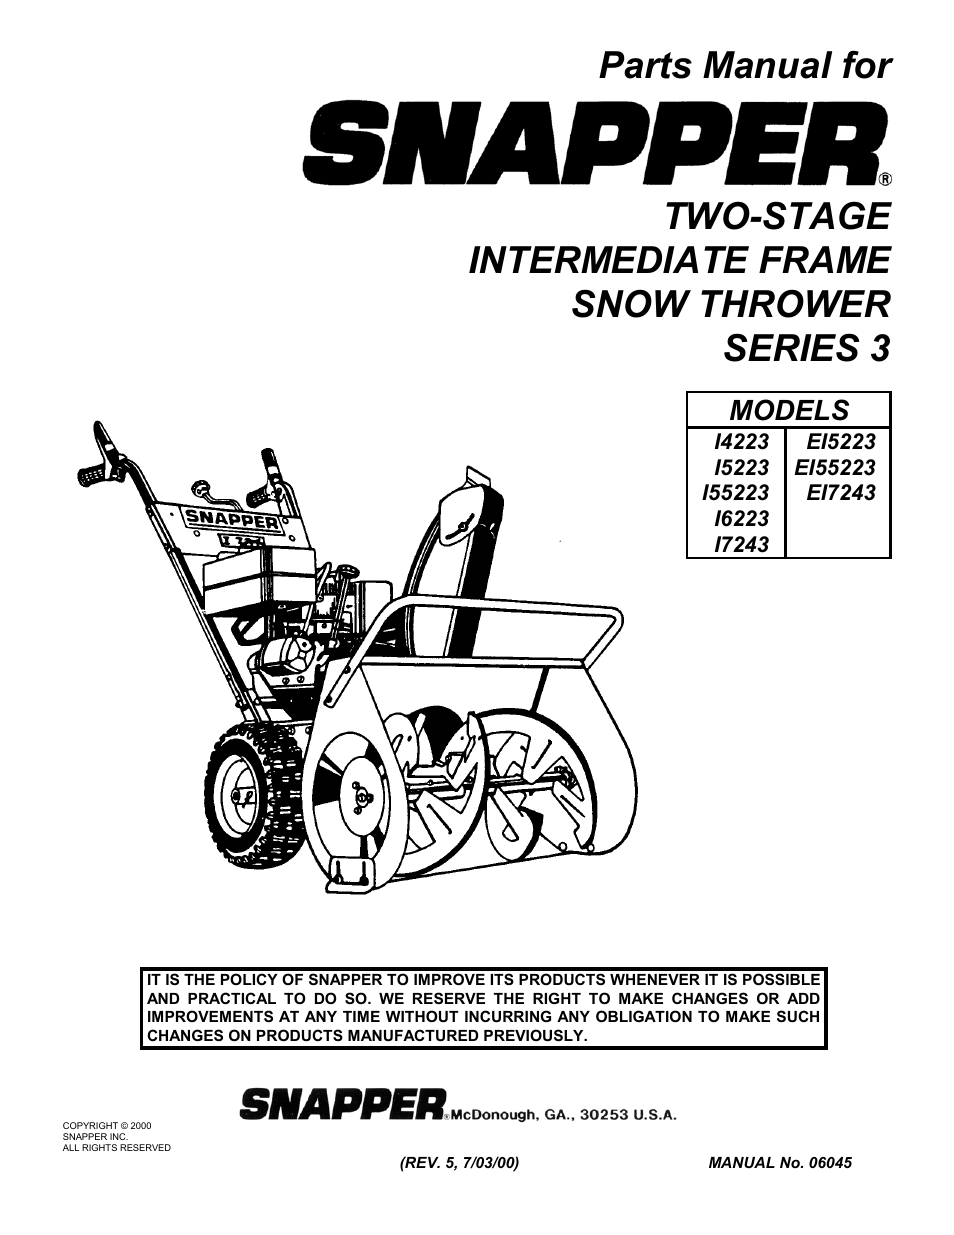 Snapper EI7243 User Manual | 24 pages | Also for: I4223, I7243, EI5223